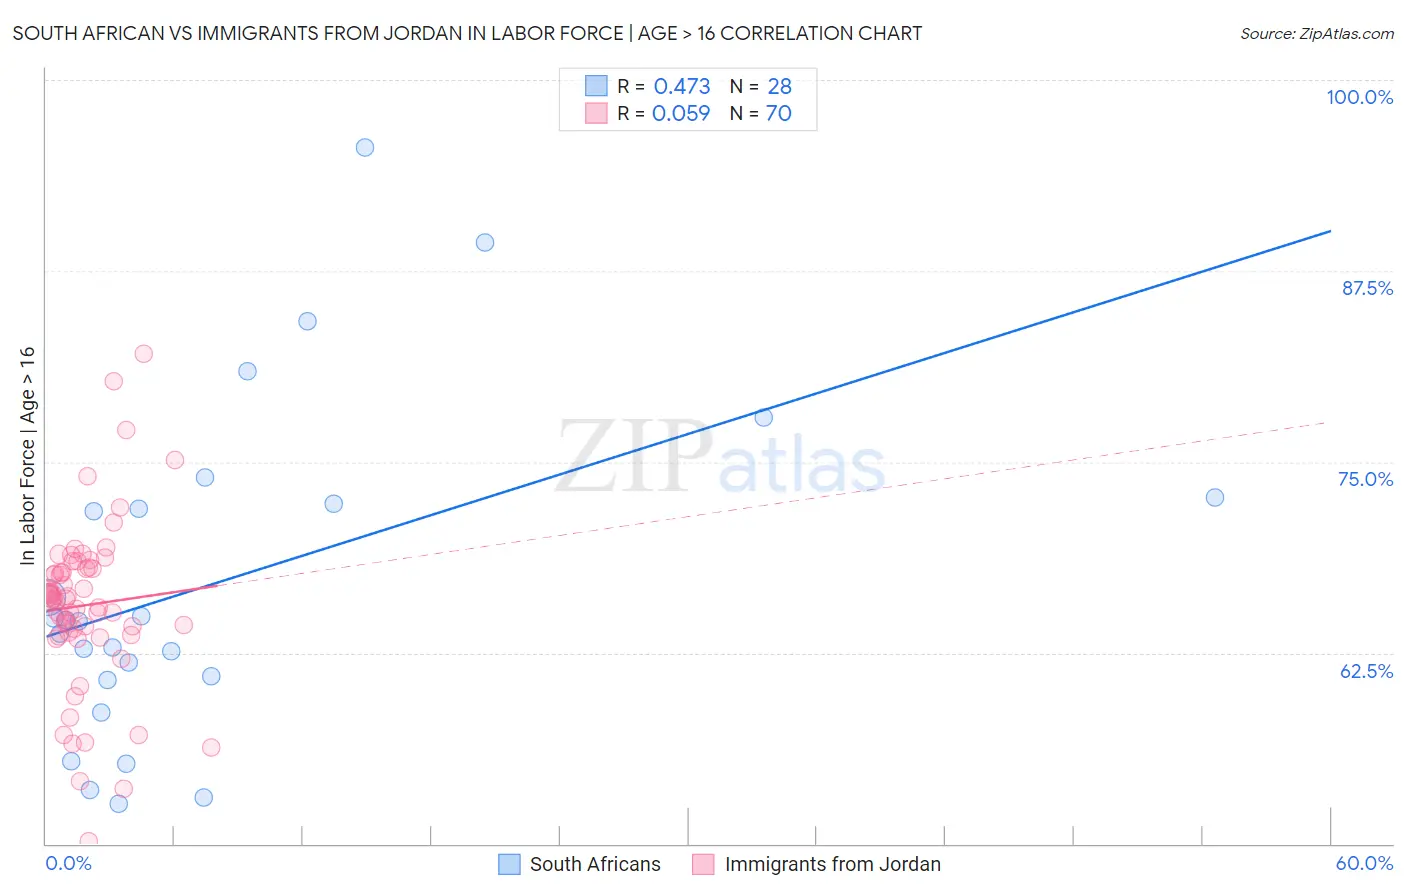 South African vs Immigrants from Jordan In Labor Force | Age > 16